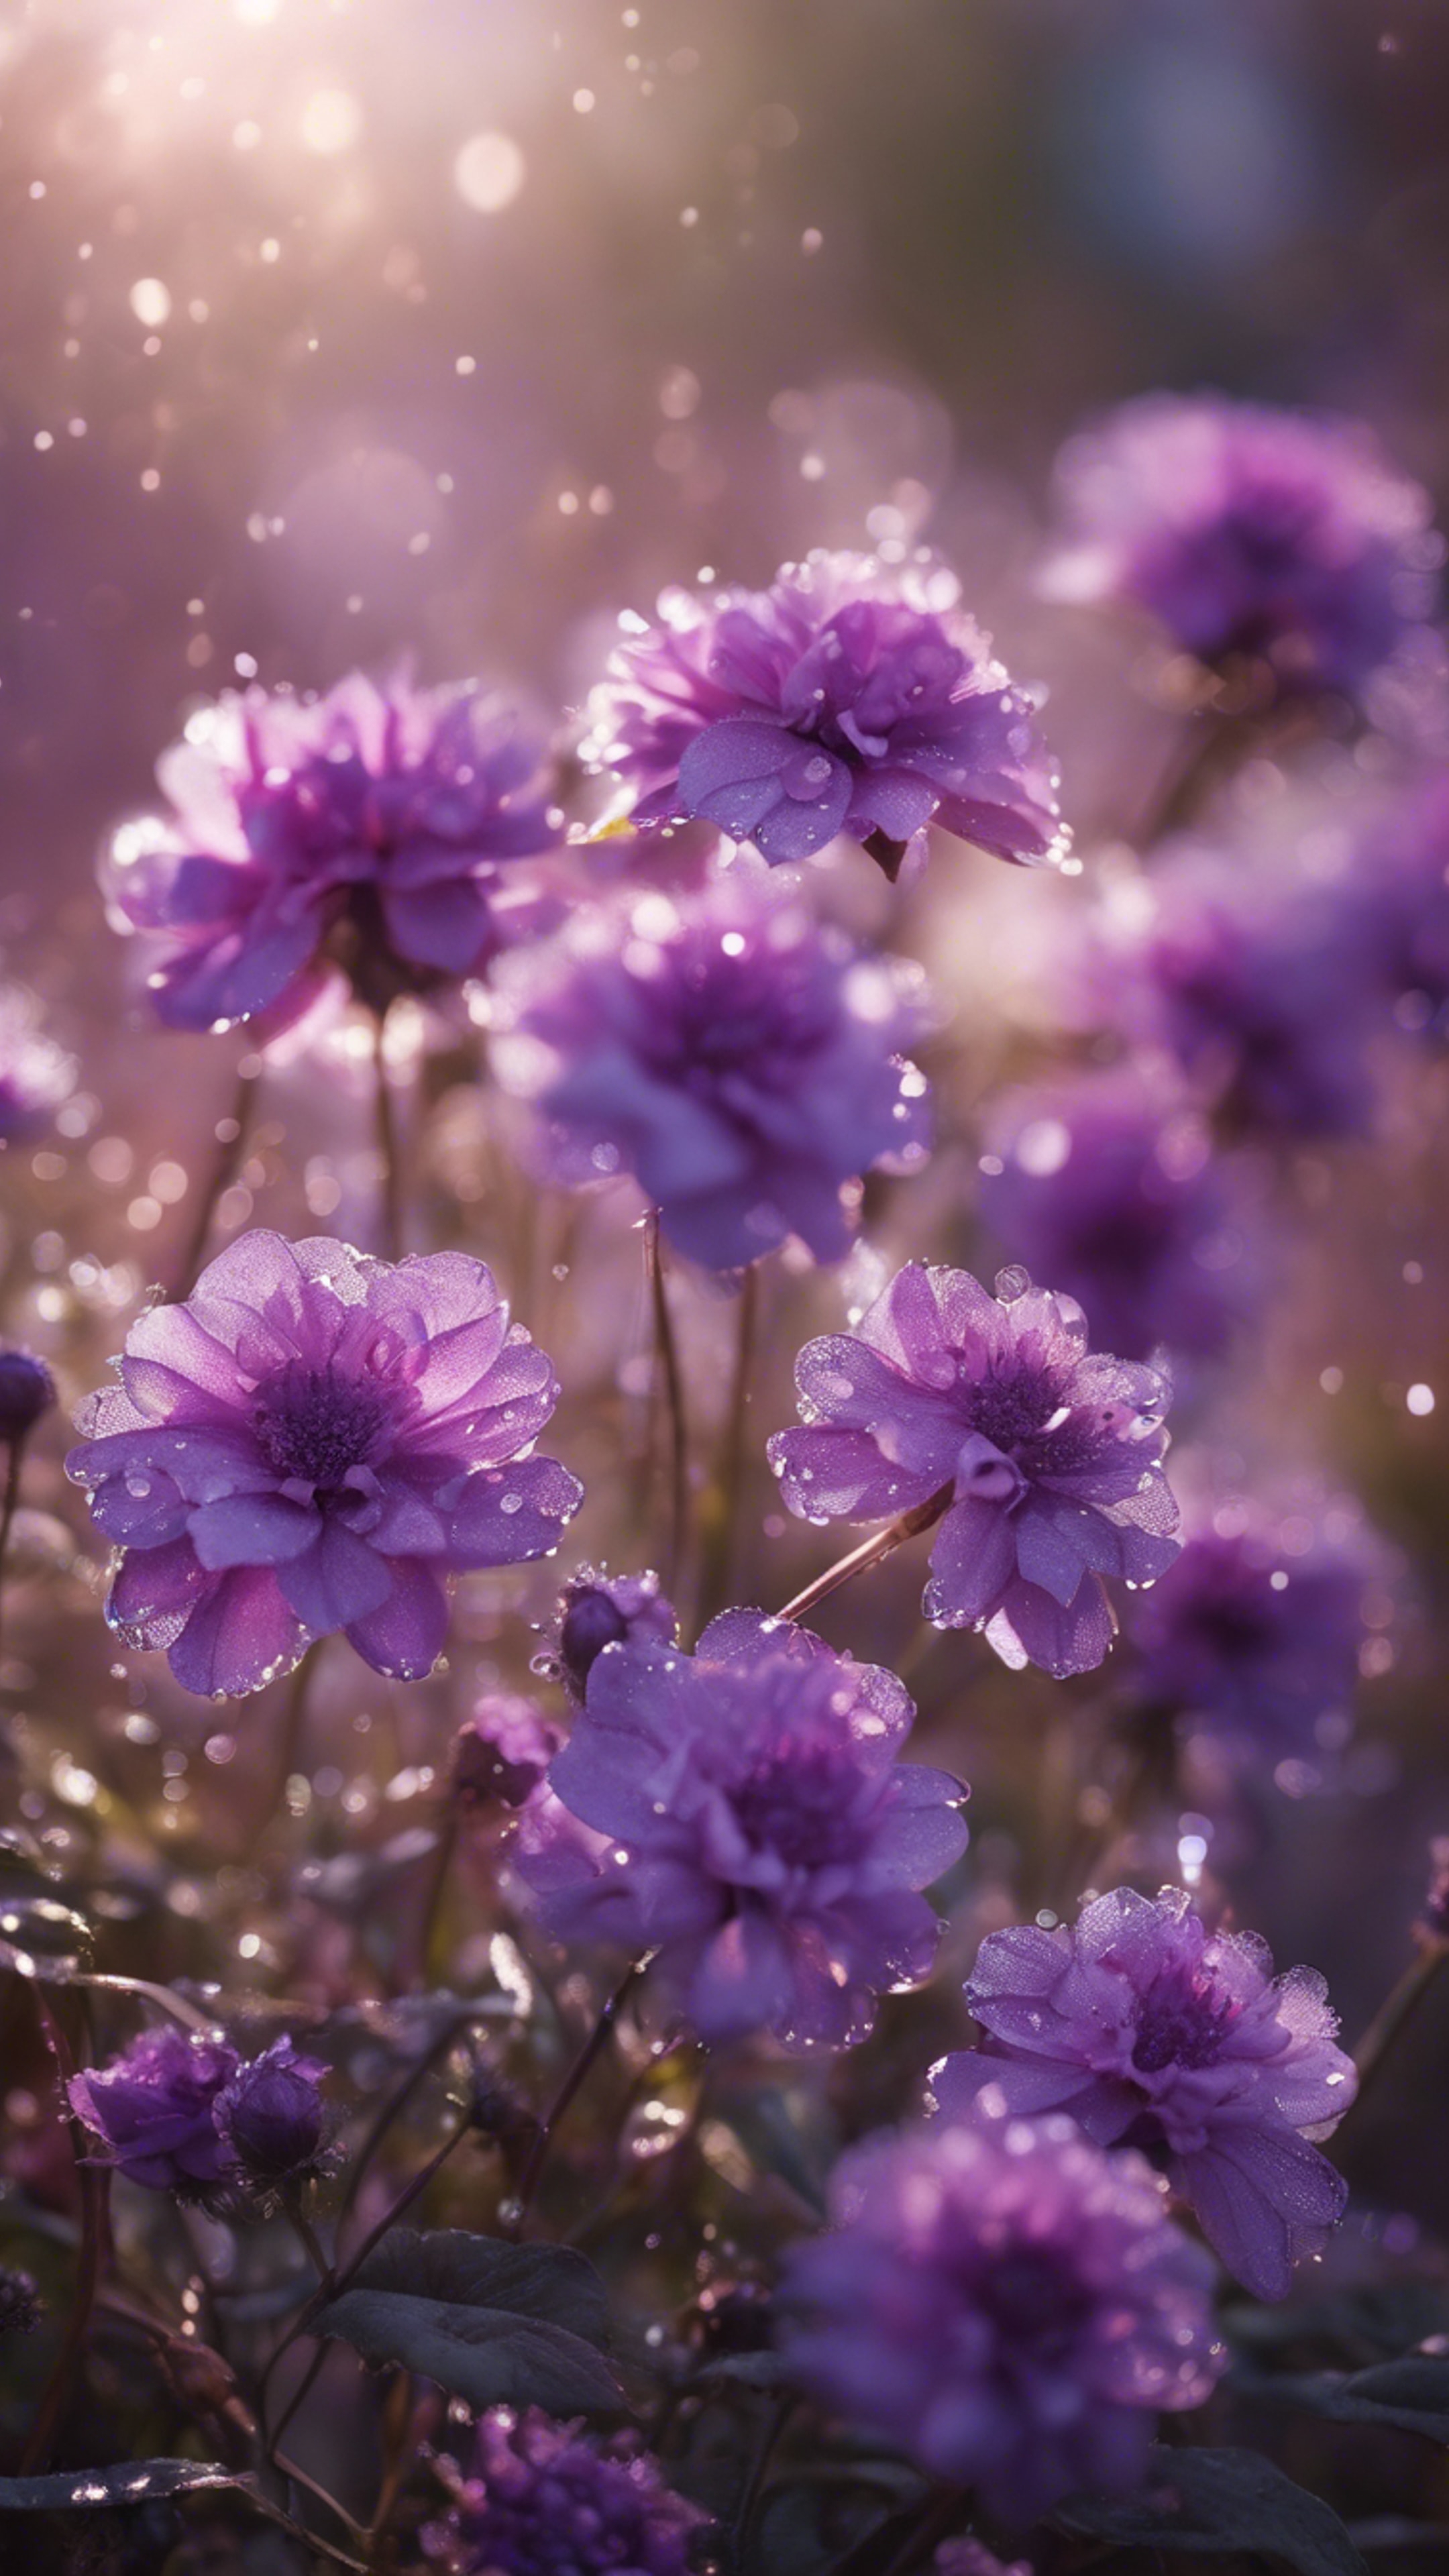 An impressive collage of purple flowers in full bloom, highlighted by sparkling morning dew. Дэлгэцийн зураг[23d1df20d4e341739cf3]